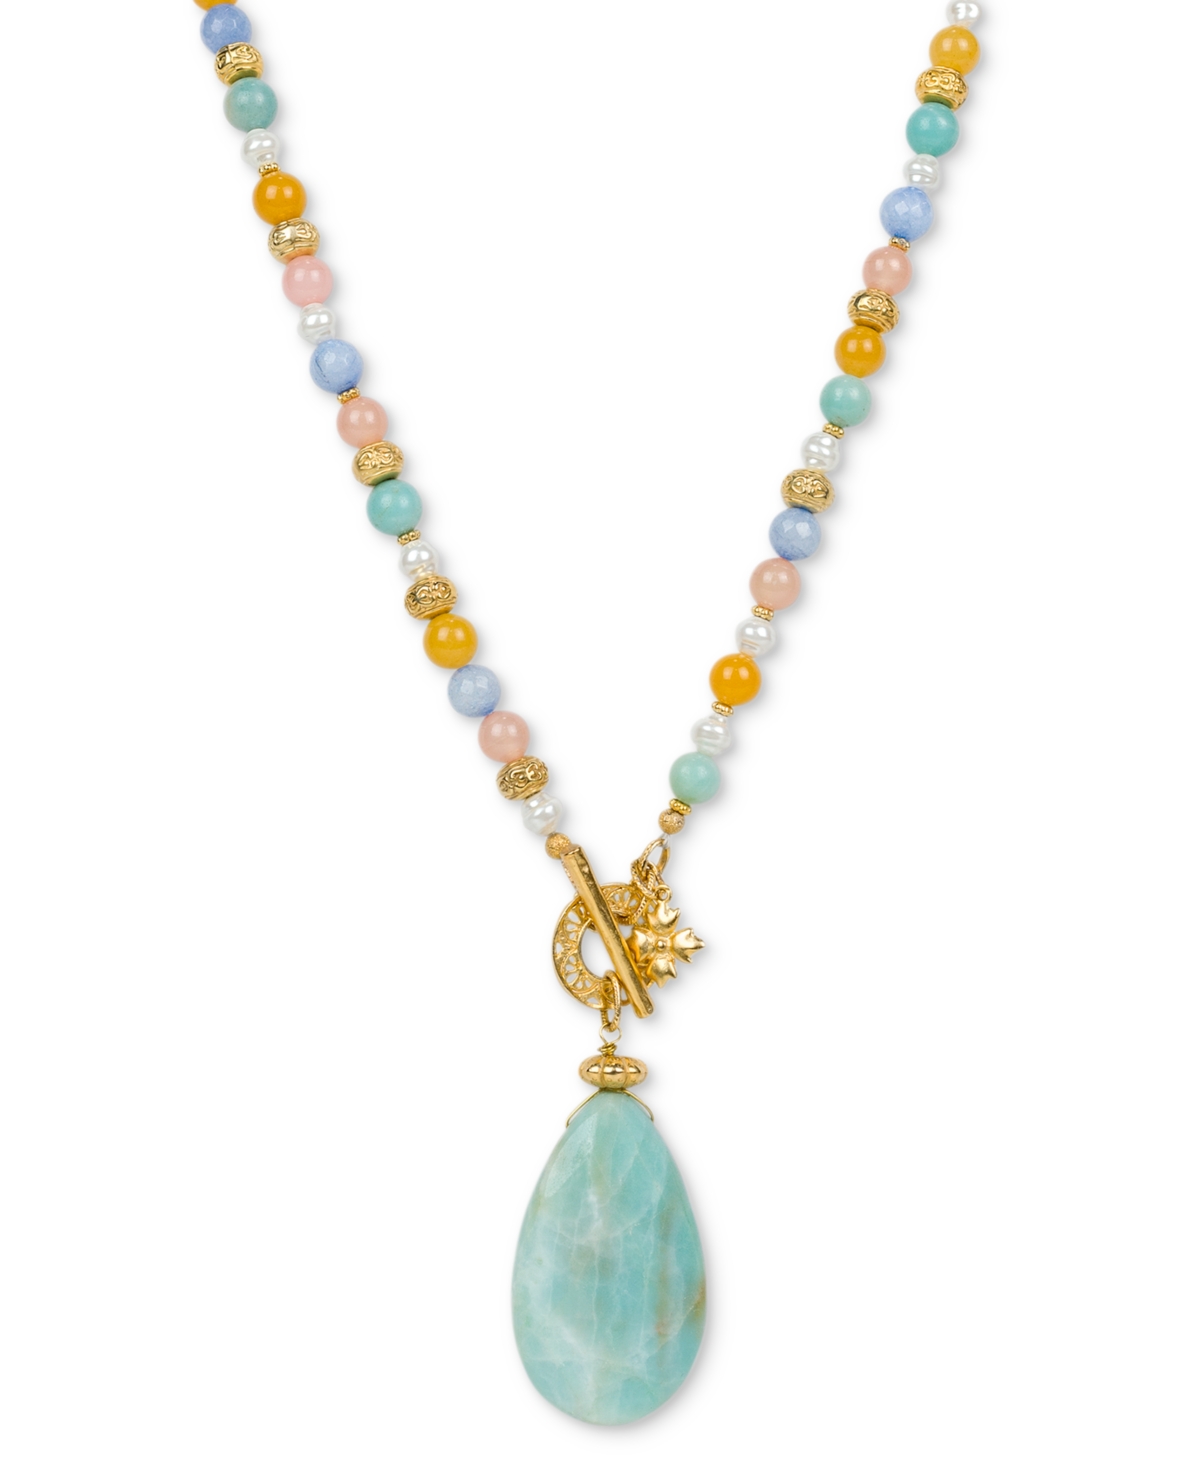 Gold-Tone Mixed Bead 38" Pendant Necklace - Egyptian Gold, Blue